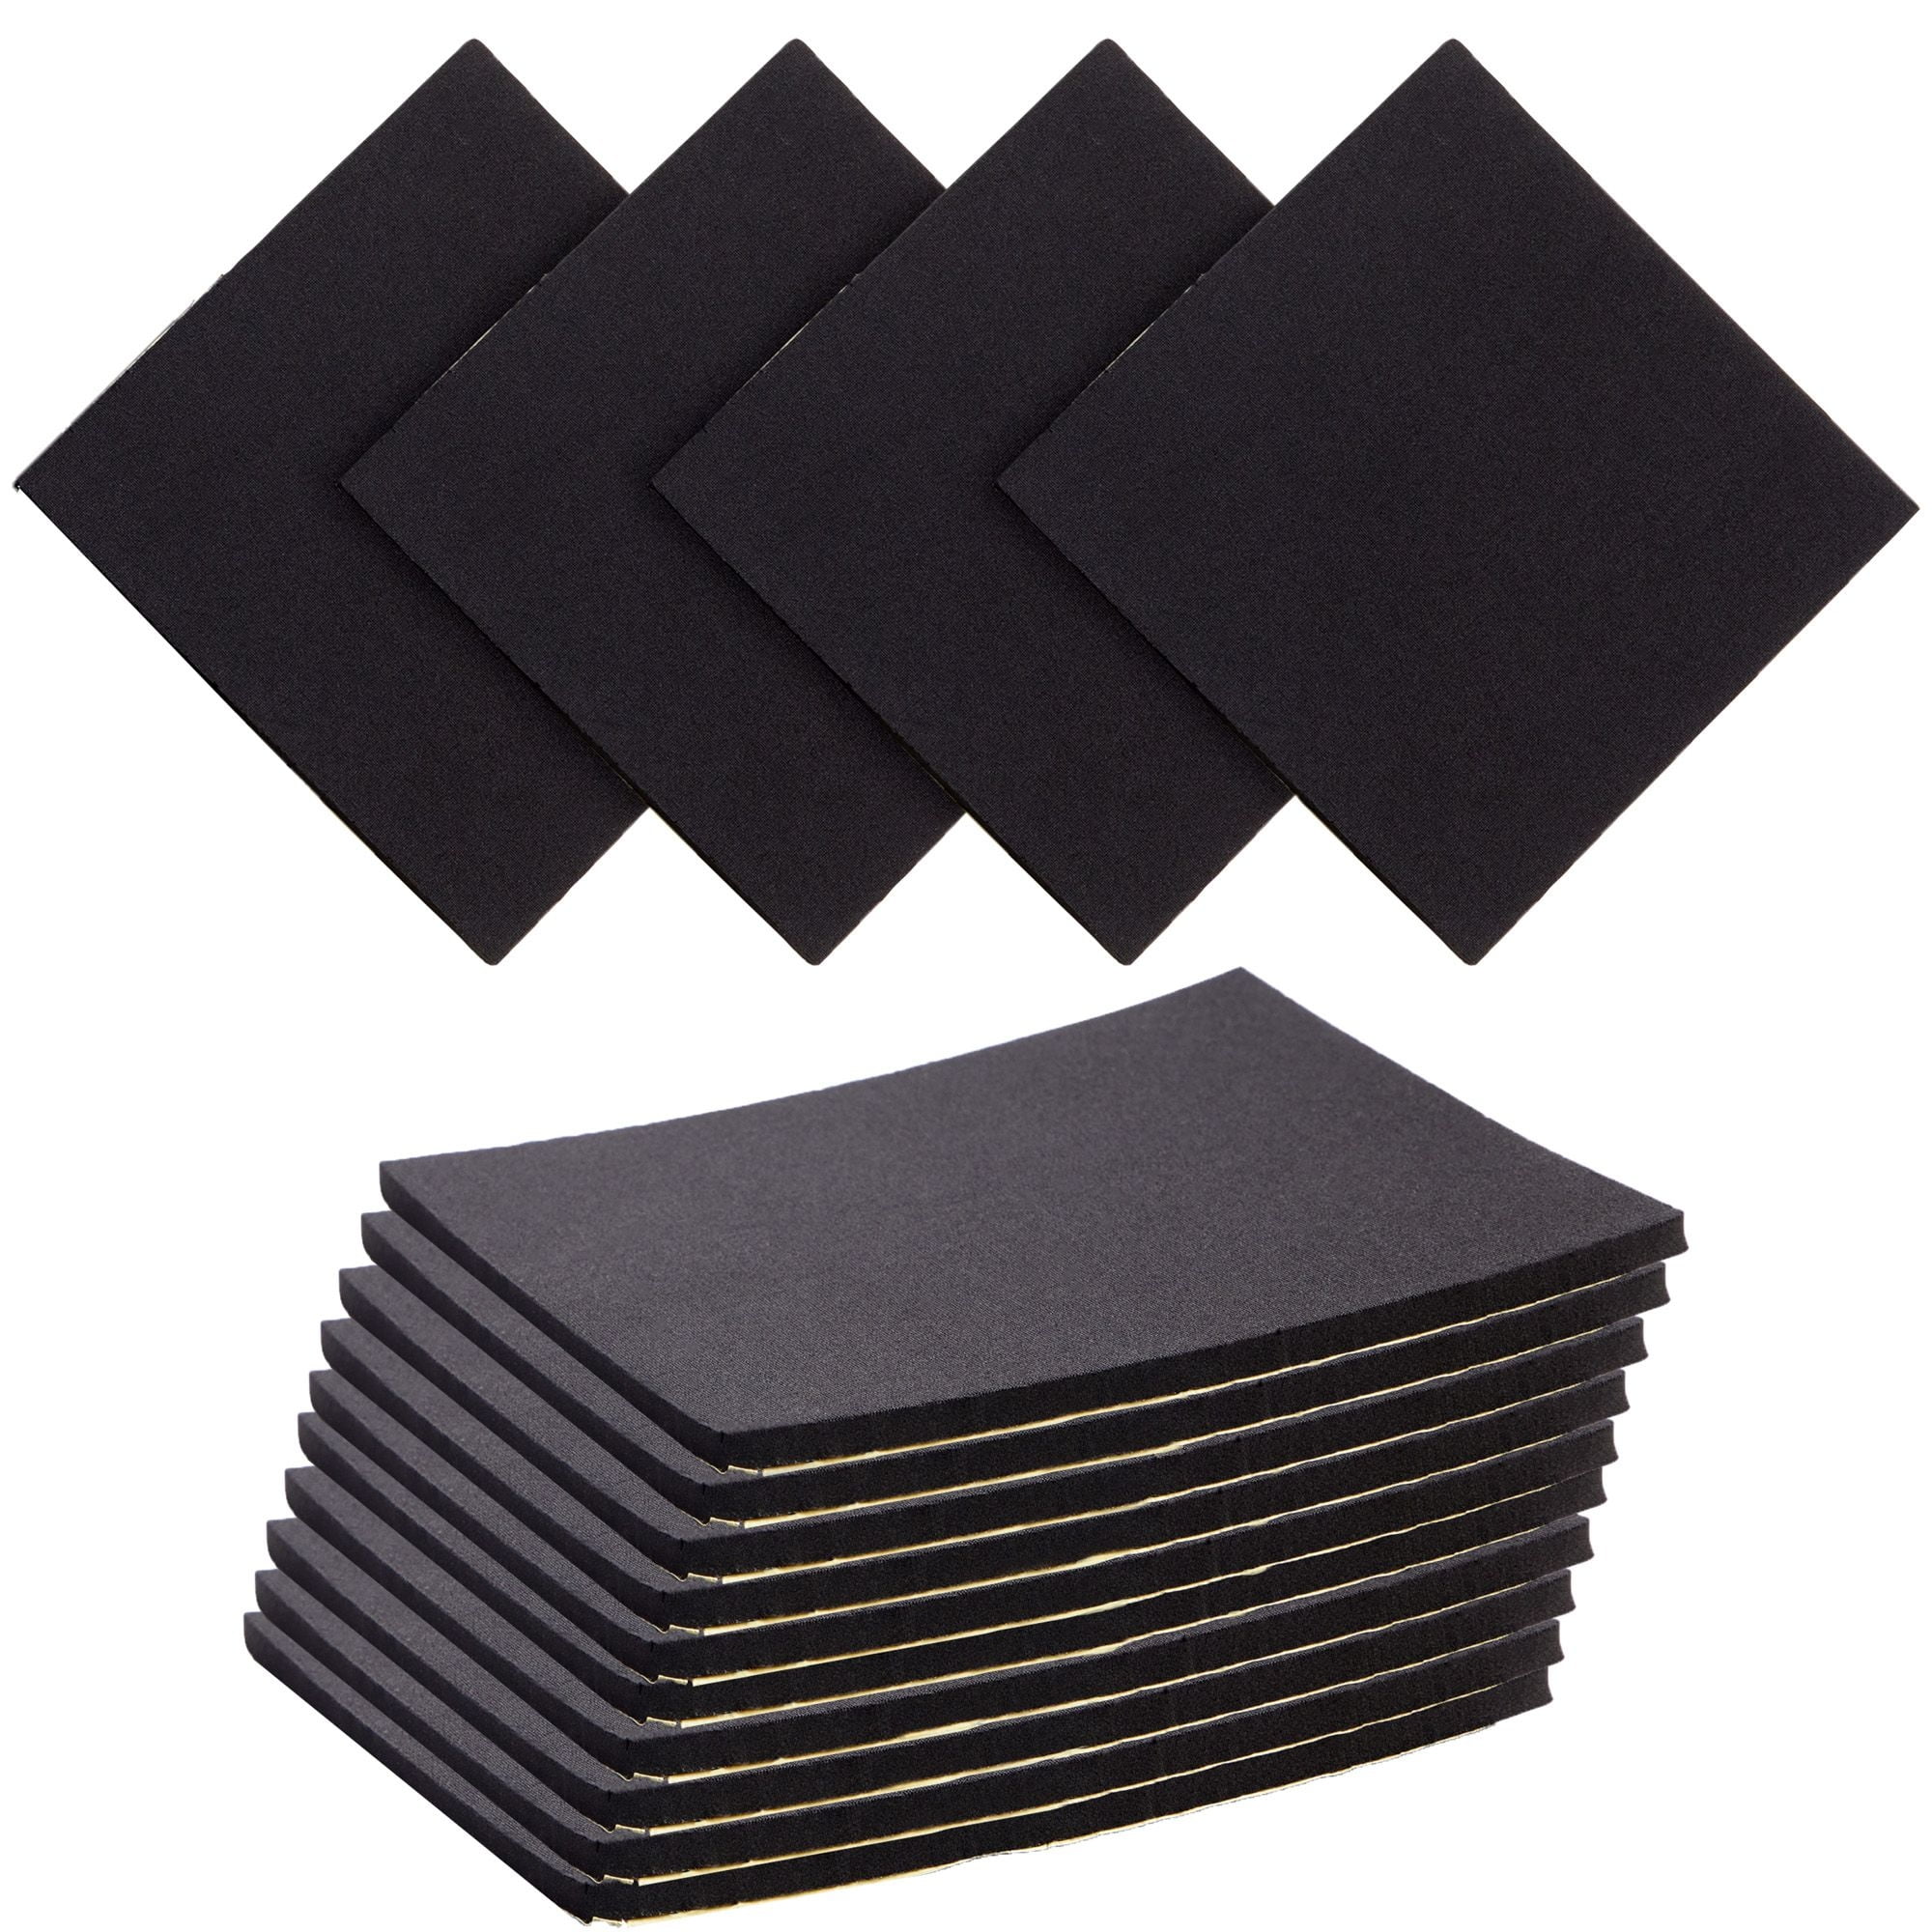 10 Pack Adhesive Foam Padding 1/4 Inch Thick Neoprene Rubber Sheets, Anti  Vibration Pads (Black, 6x6 In)